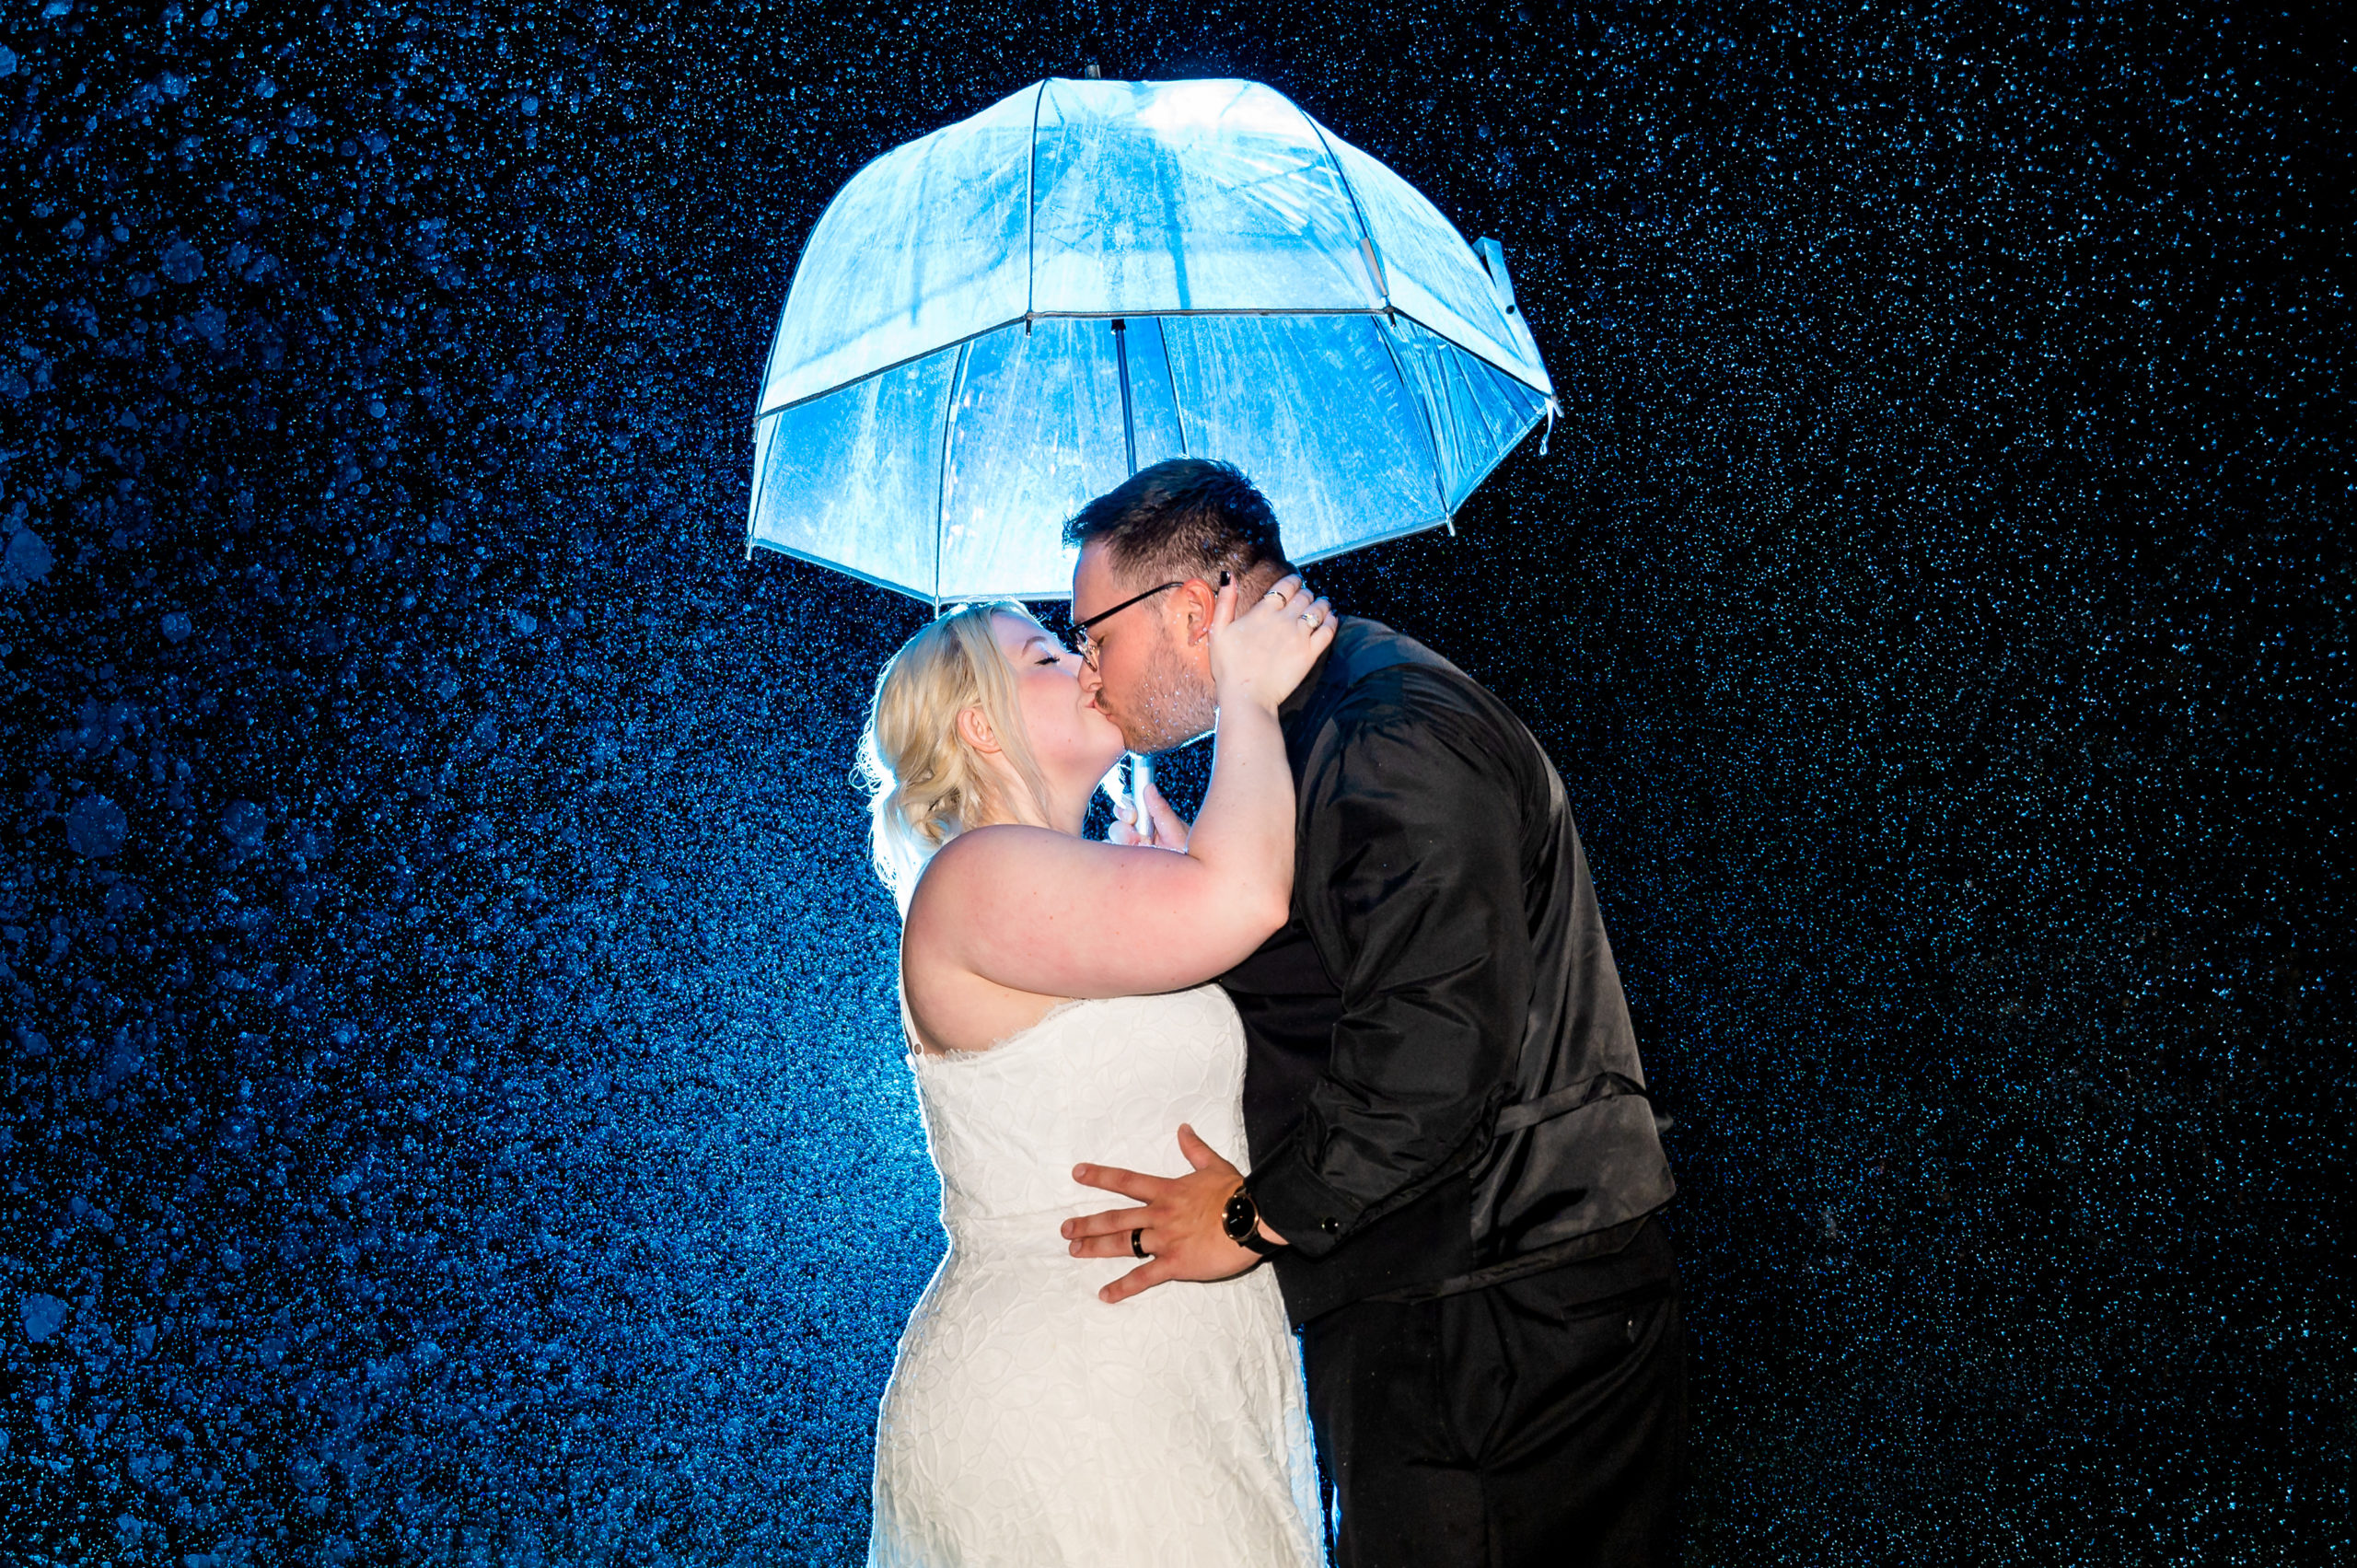 Nighttime wedding photo in the rain with an umbrella at Vitners Pavilion by Valenzano Winery in Shamong NJ